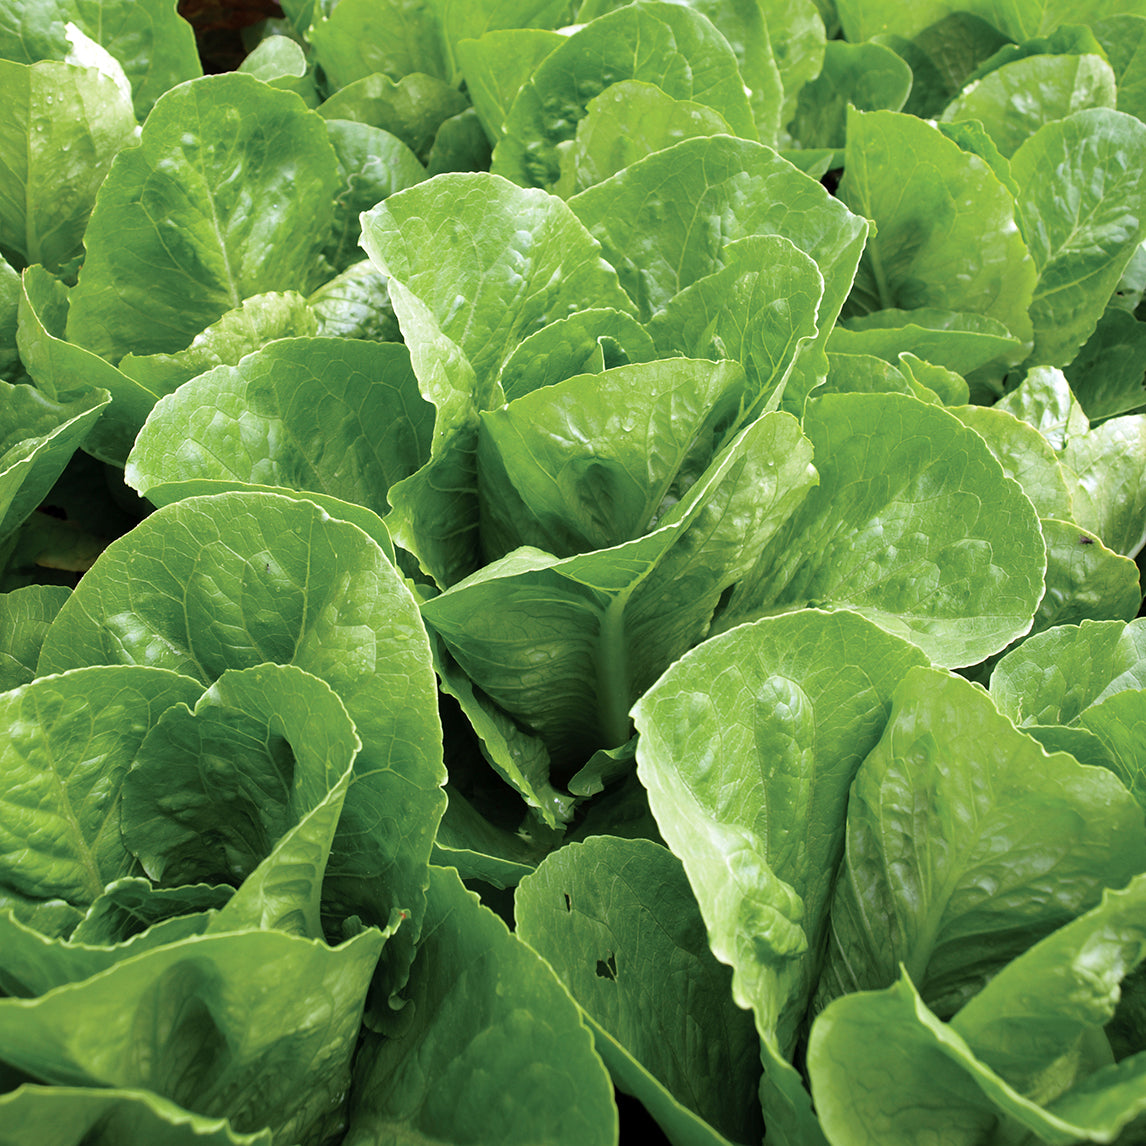 Free Lettuce 'Baby Cos' - Free Seed Offer